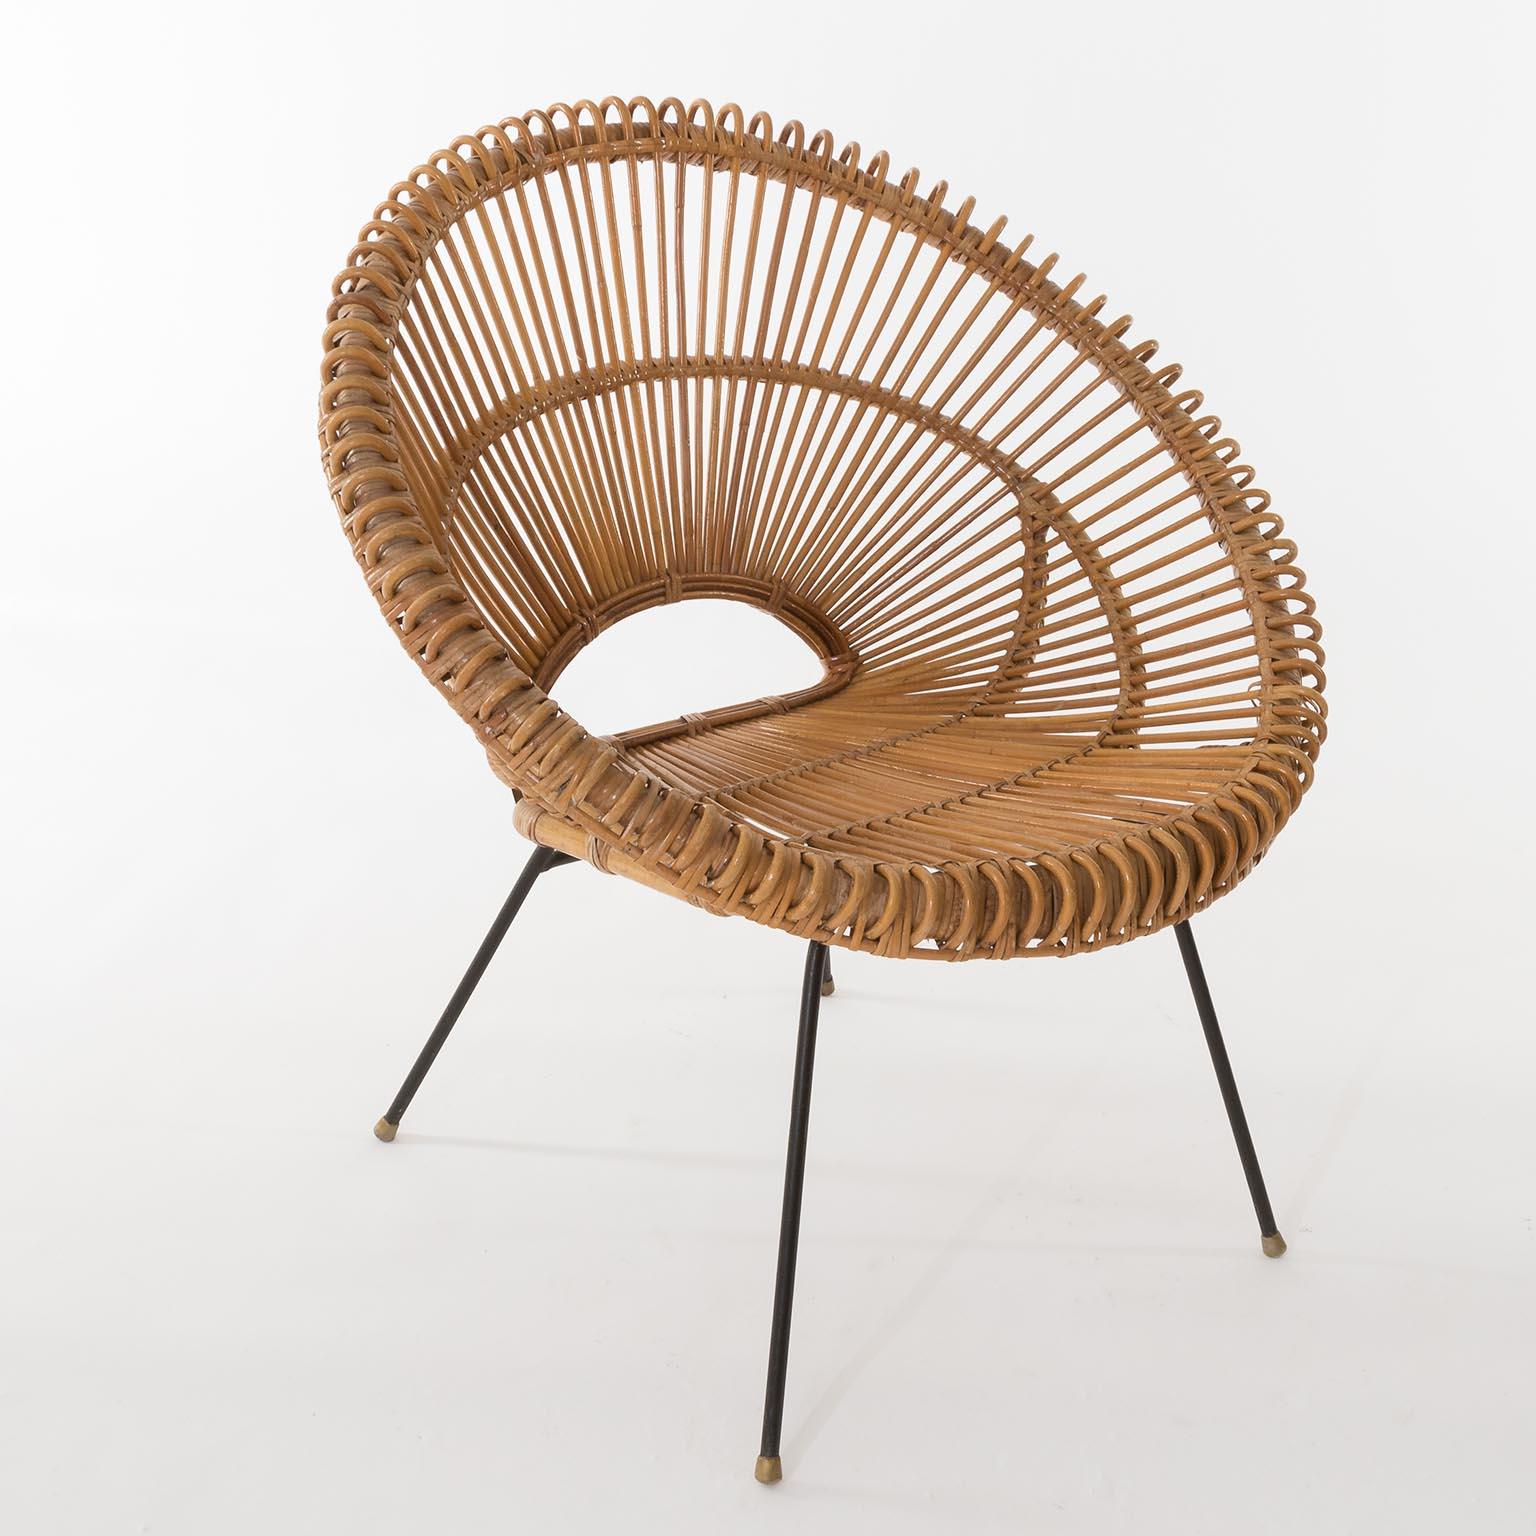 Pair of Mid-Century Modern Rattan Bamboo Chairs, Janine Abraham, Dirk Rol, 1960s For Sale 1